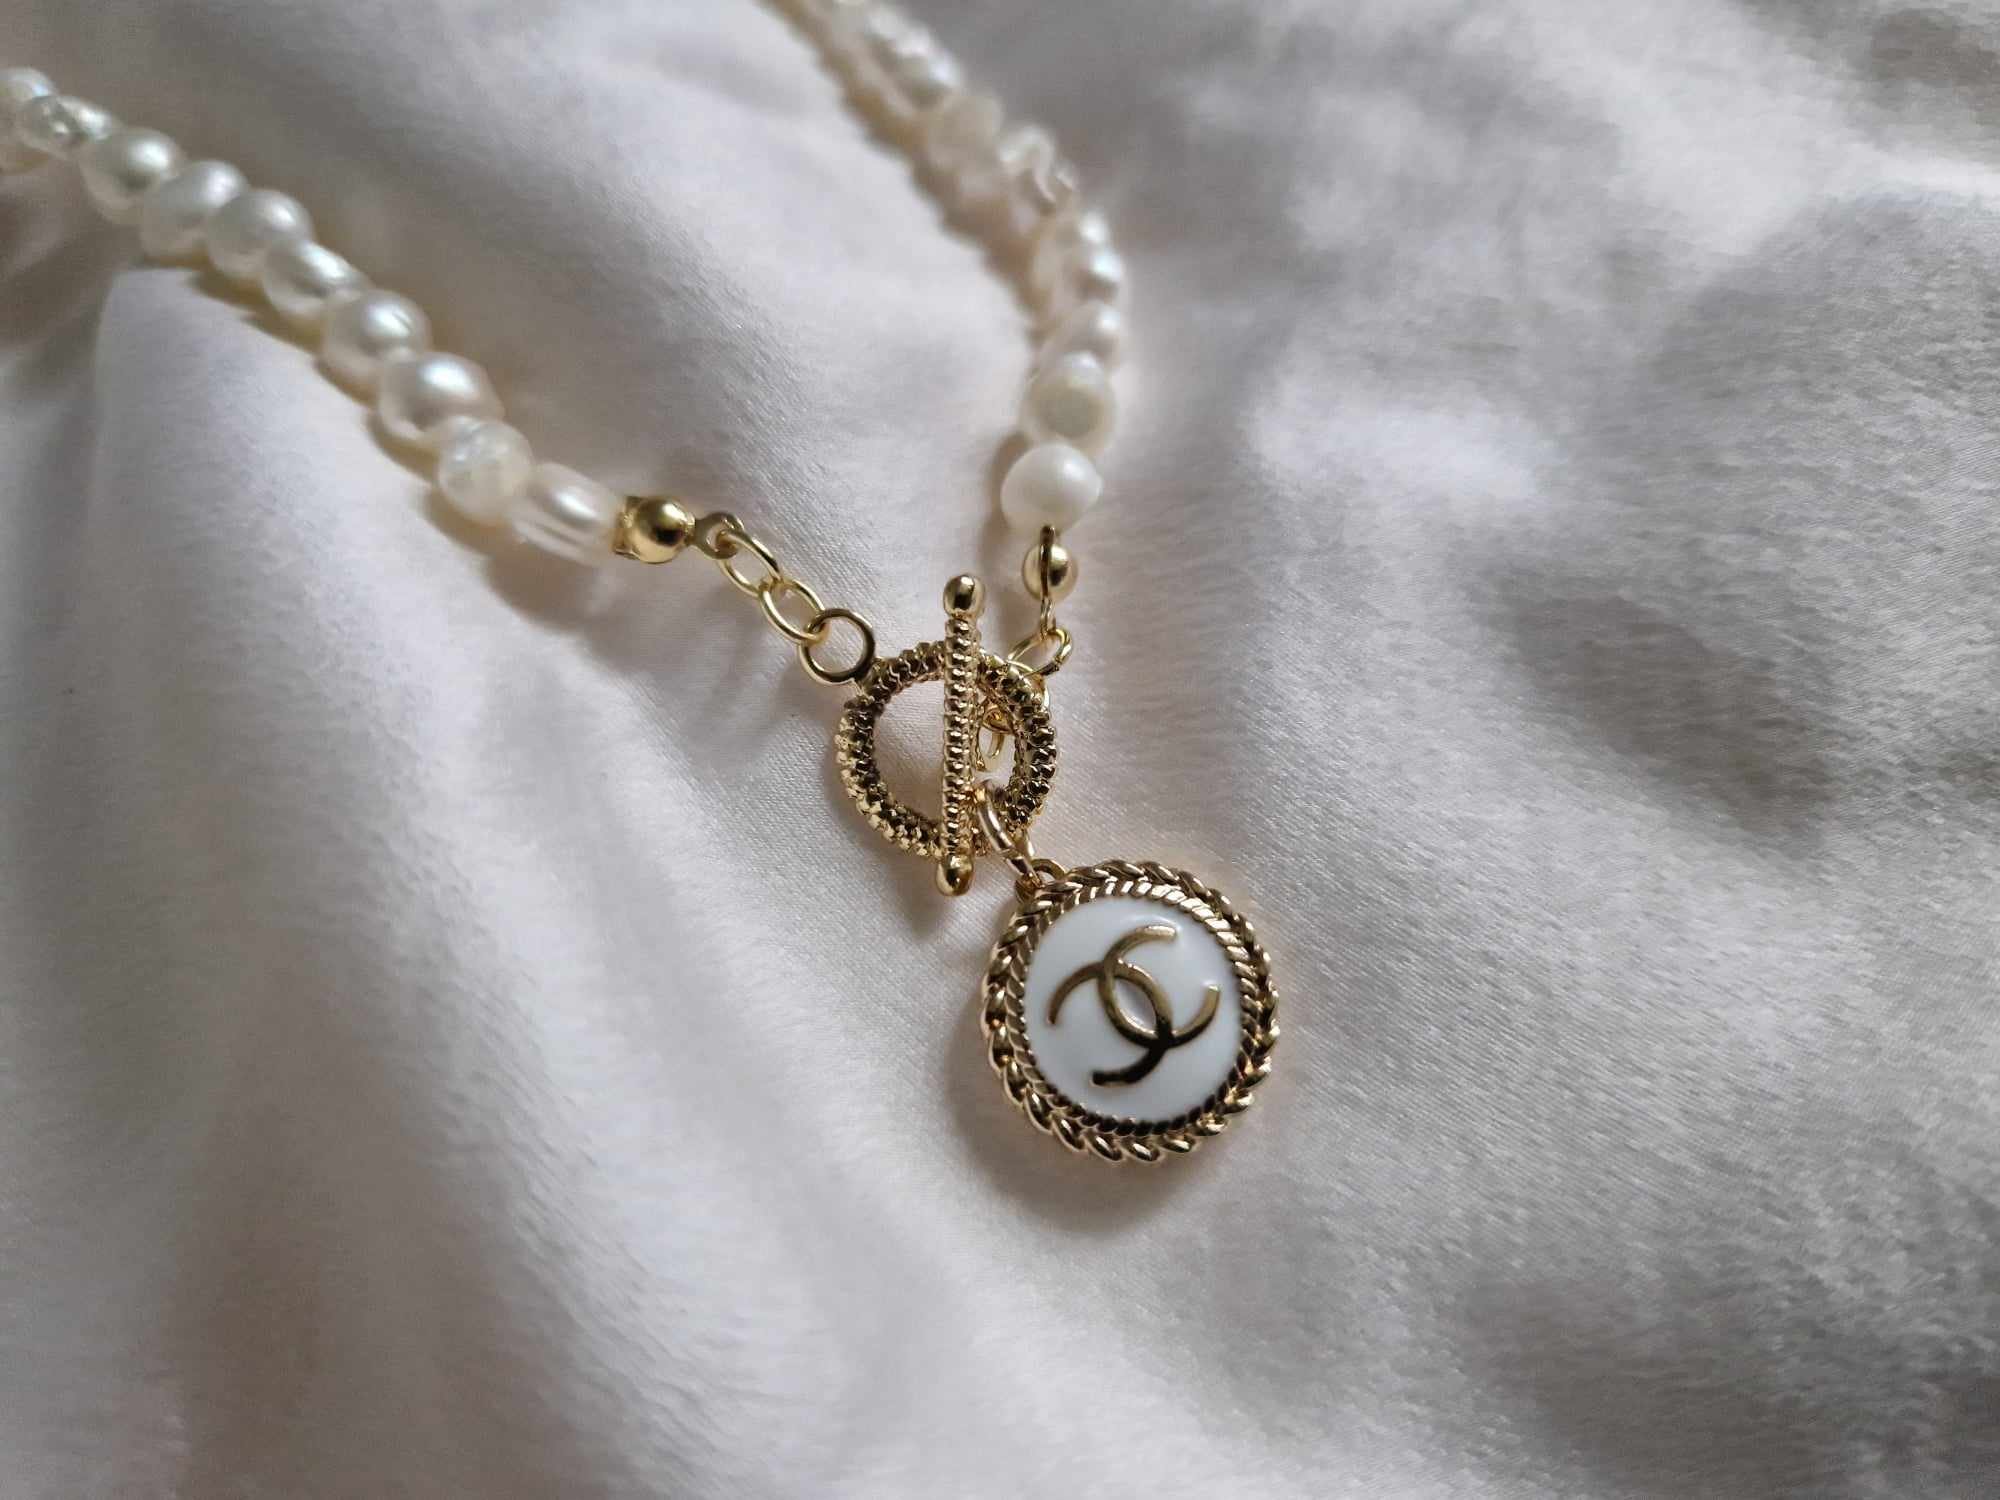 Vintage White & Gold Chanel Button Necklace